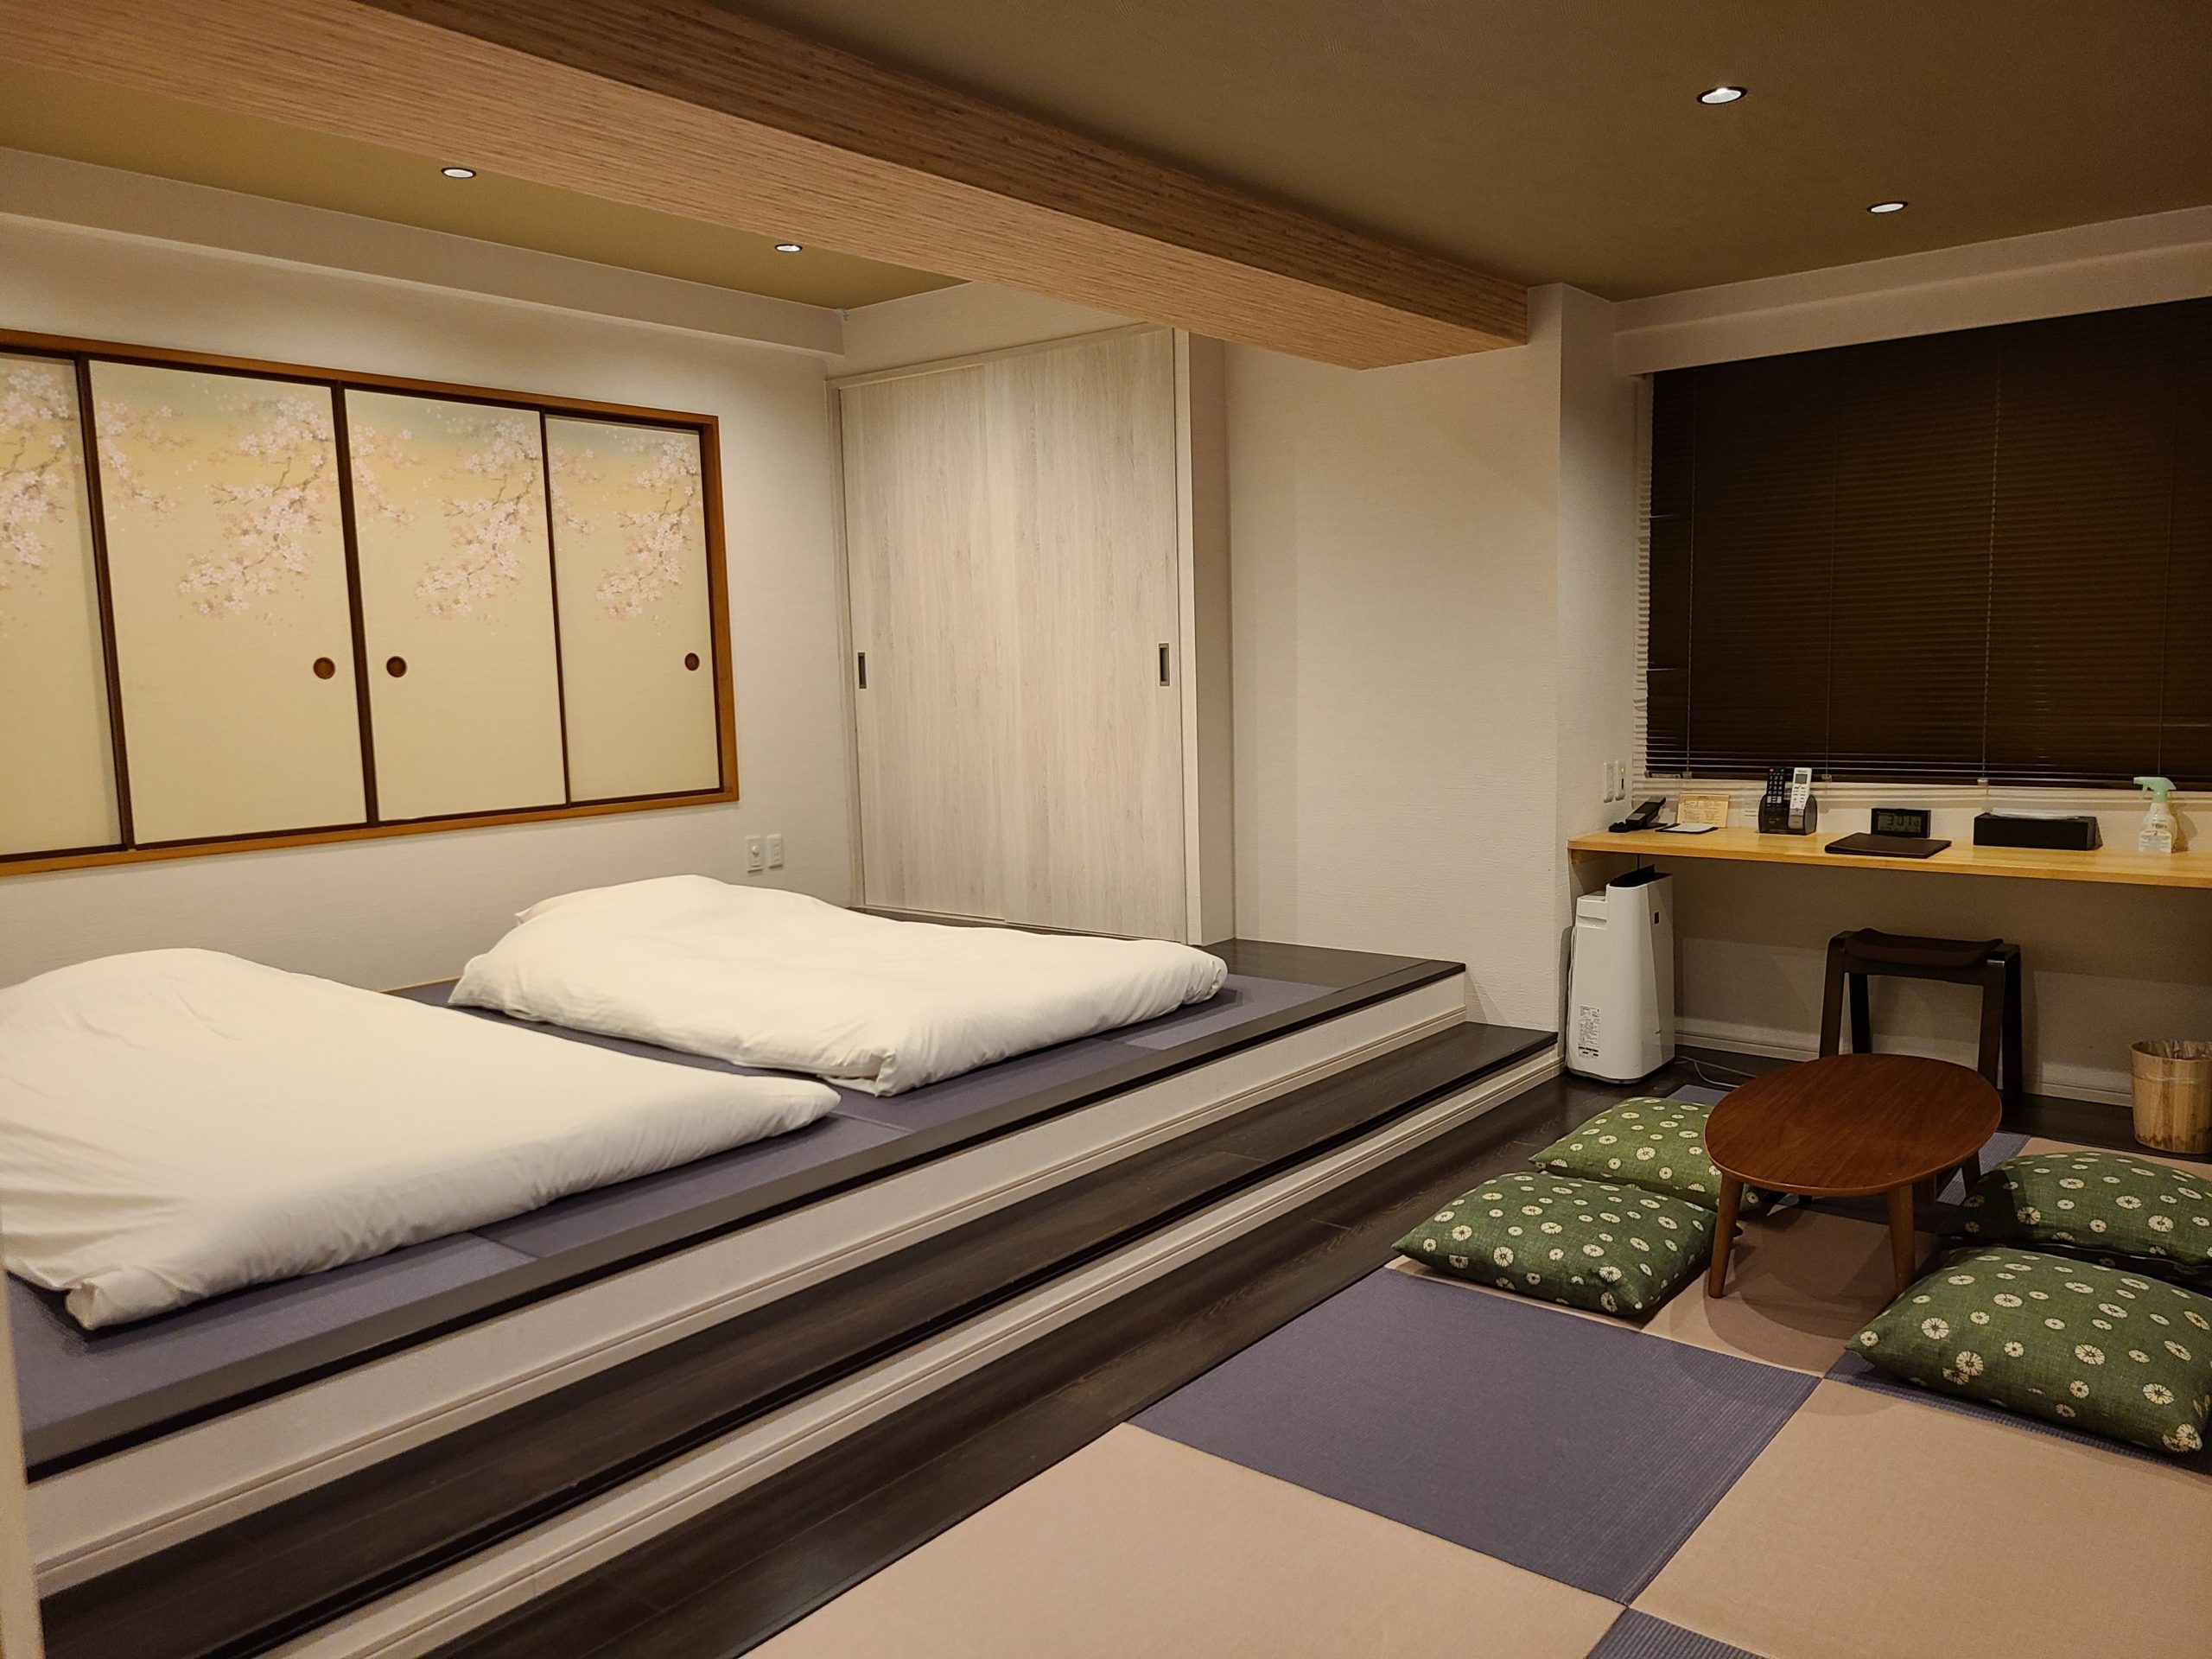 One of the larger rooms that was renovated into a modern-style Japanese room